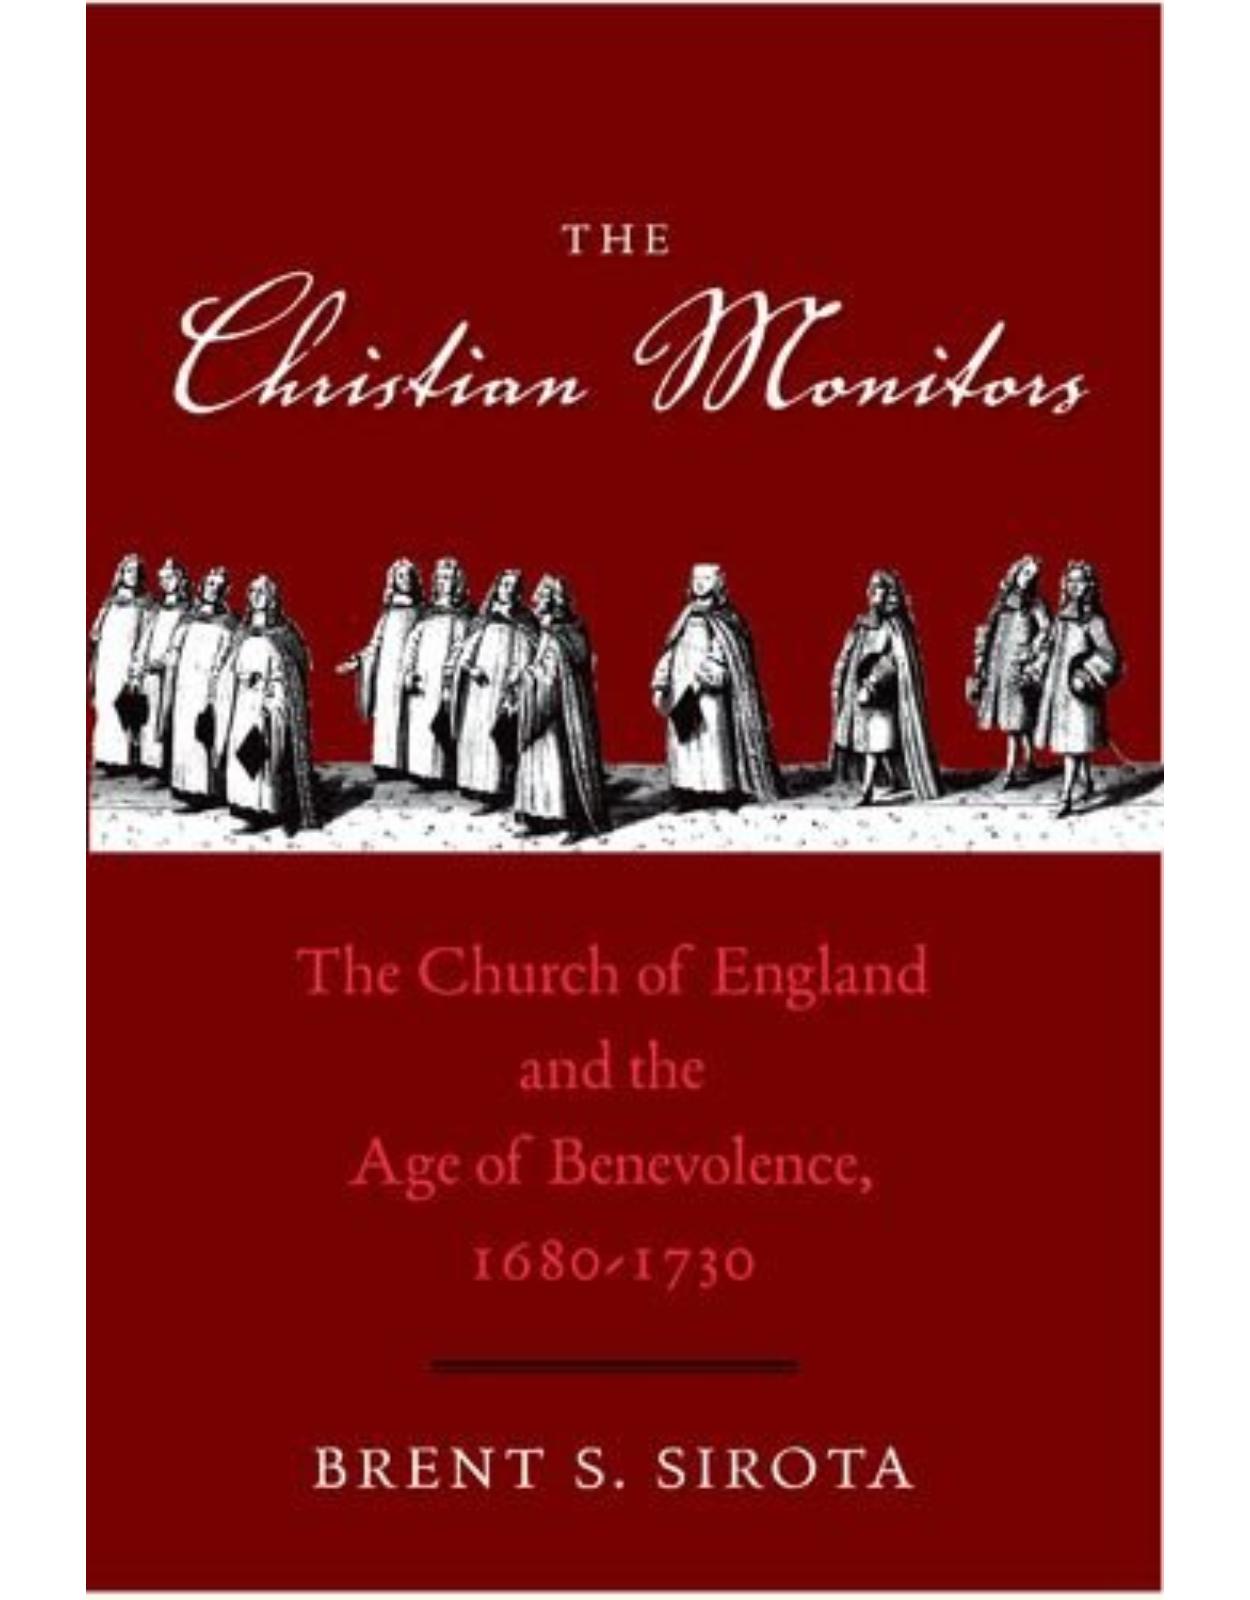 Christian Monitors. The Church of England and the Age of Benevolence, 1680-1730